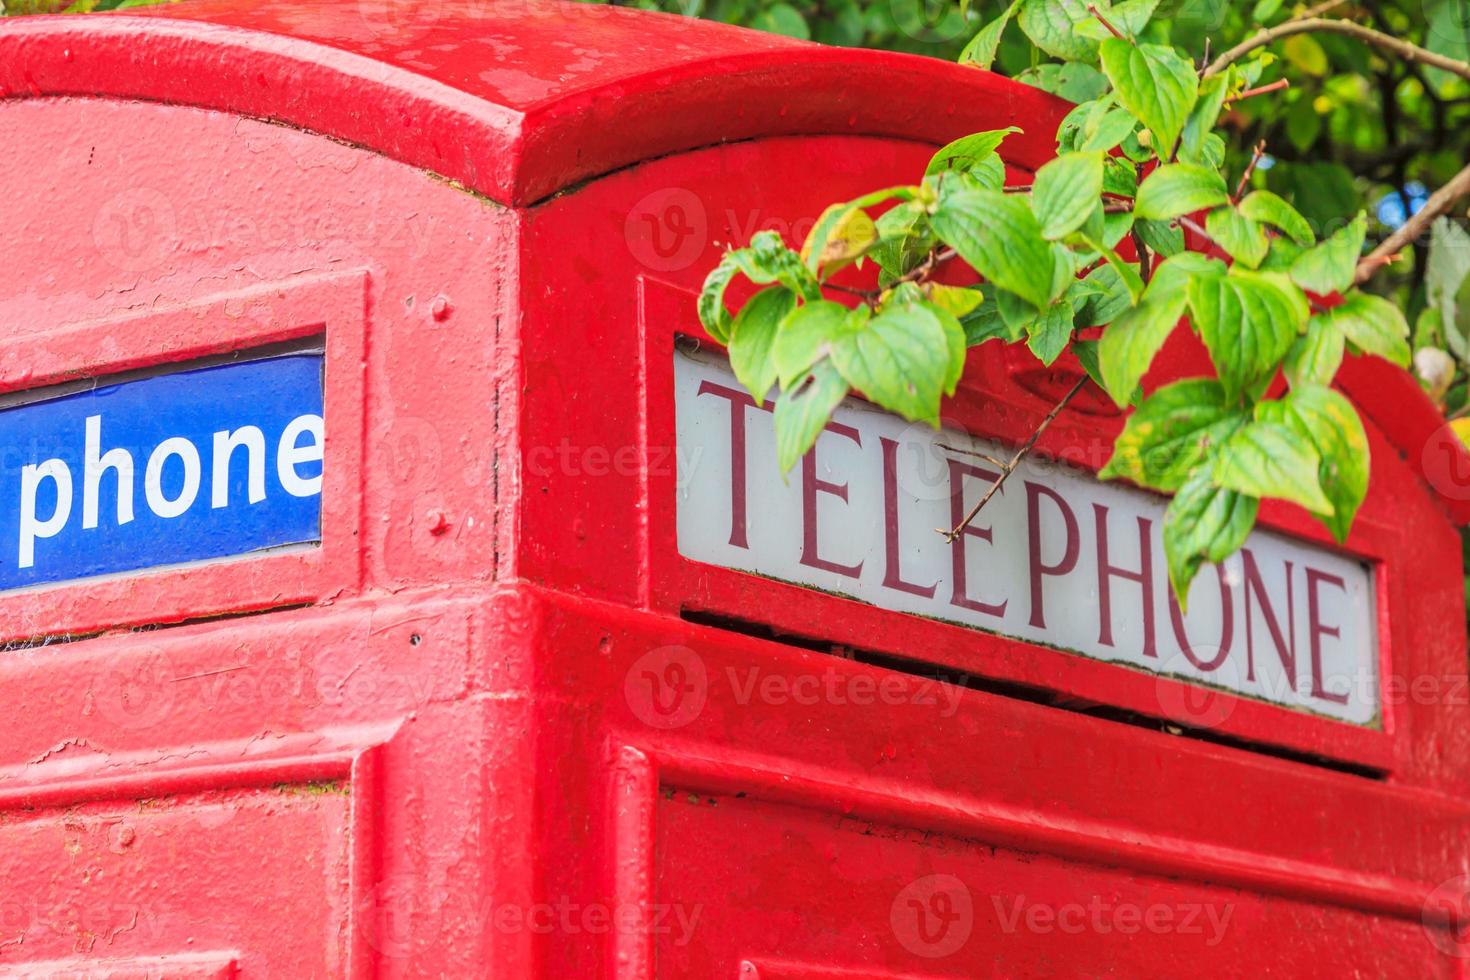 Cutting of a typical English telephone booth photo